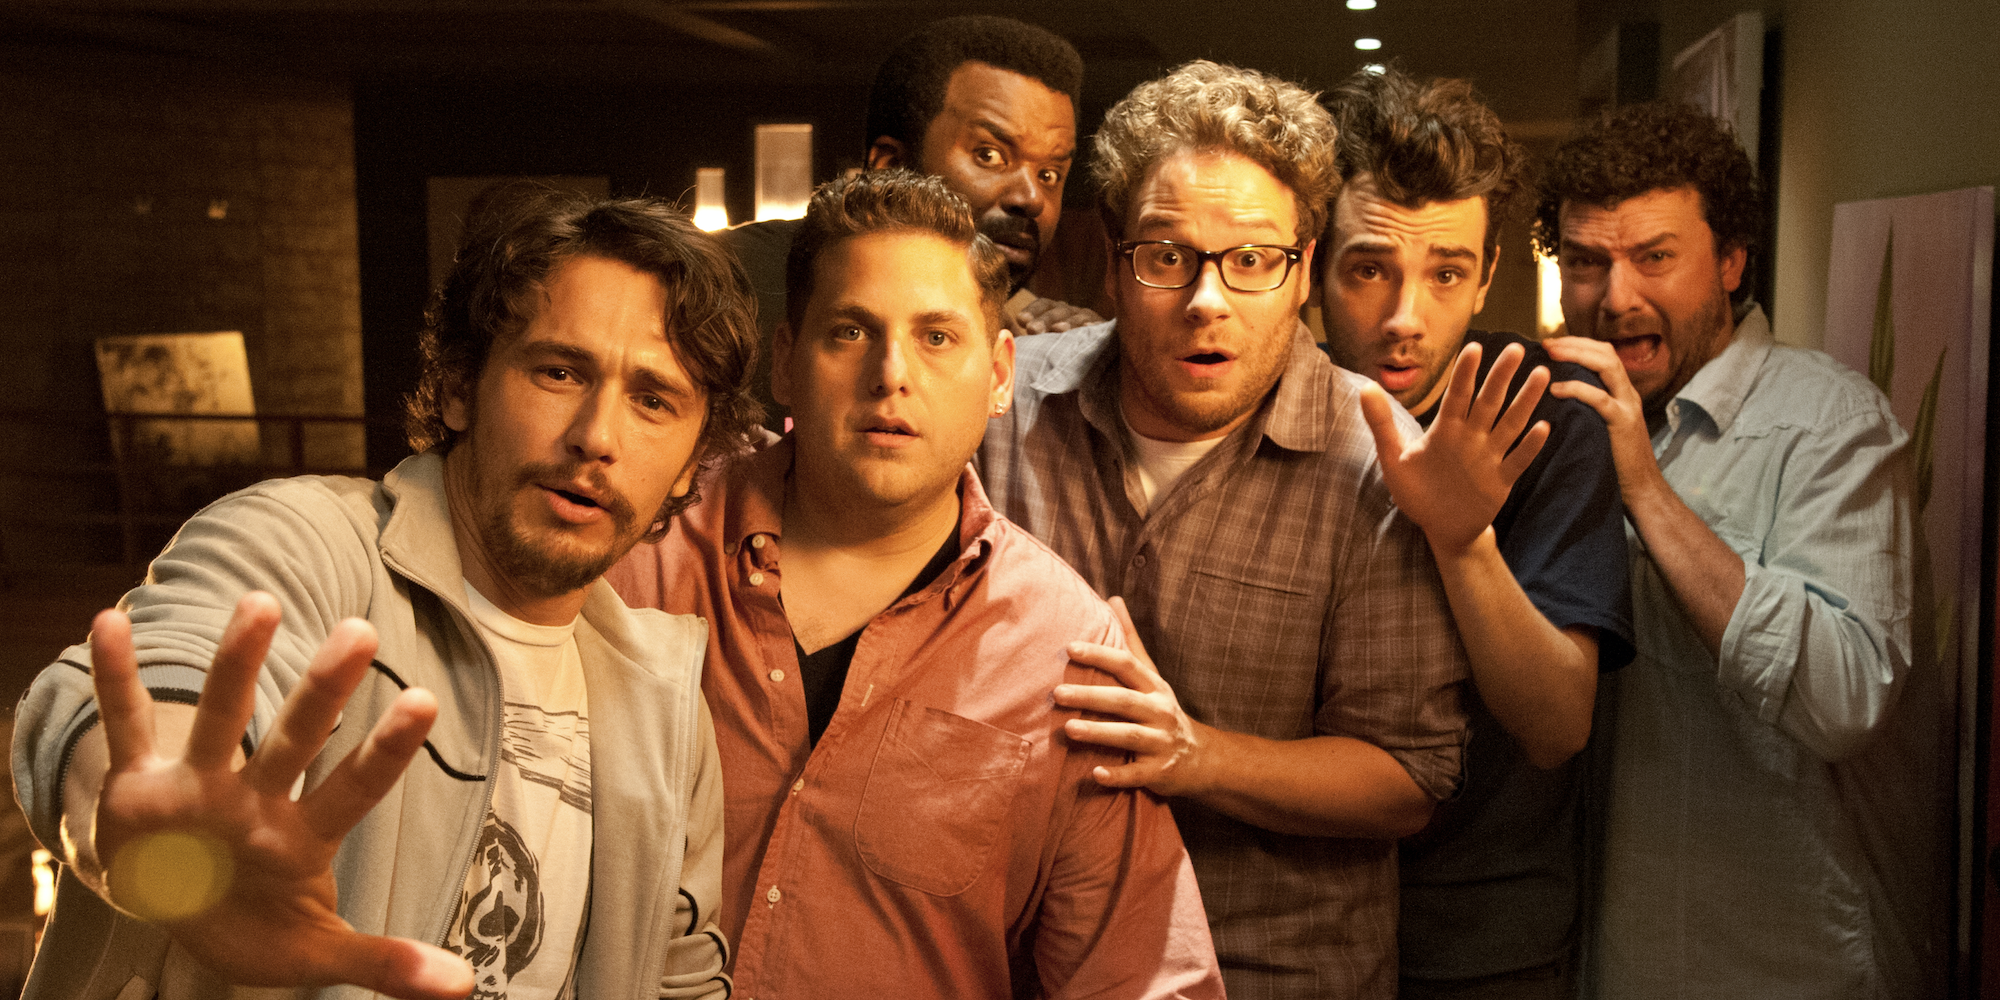 James Franco, Jonah Hill, Craig Robinson, Seth Rogen, Jay Baruchel and Danny McBride acting scared of the apocalypse in This Is The End.